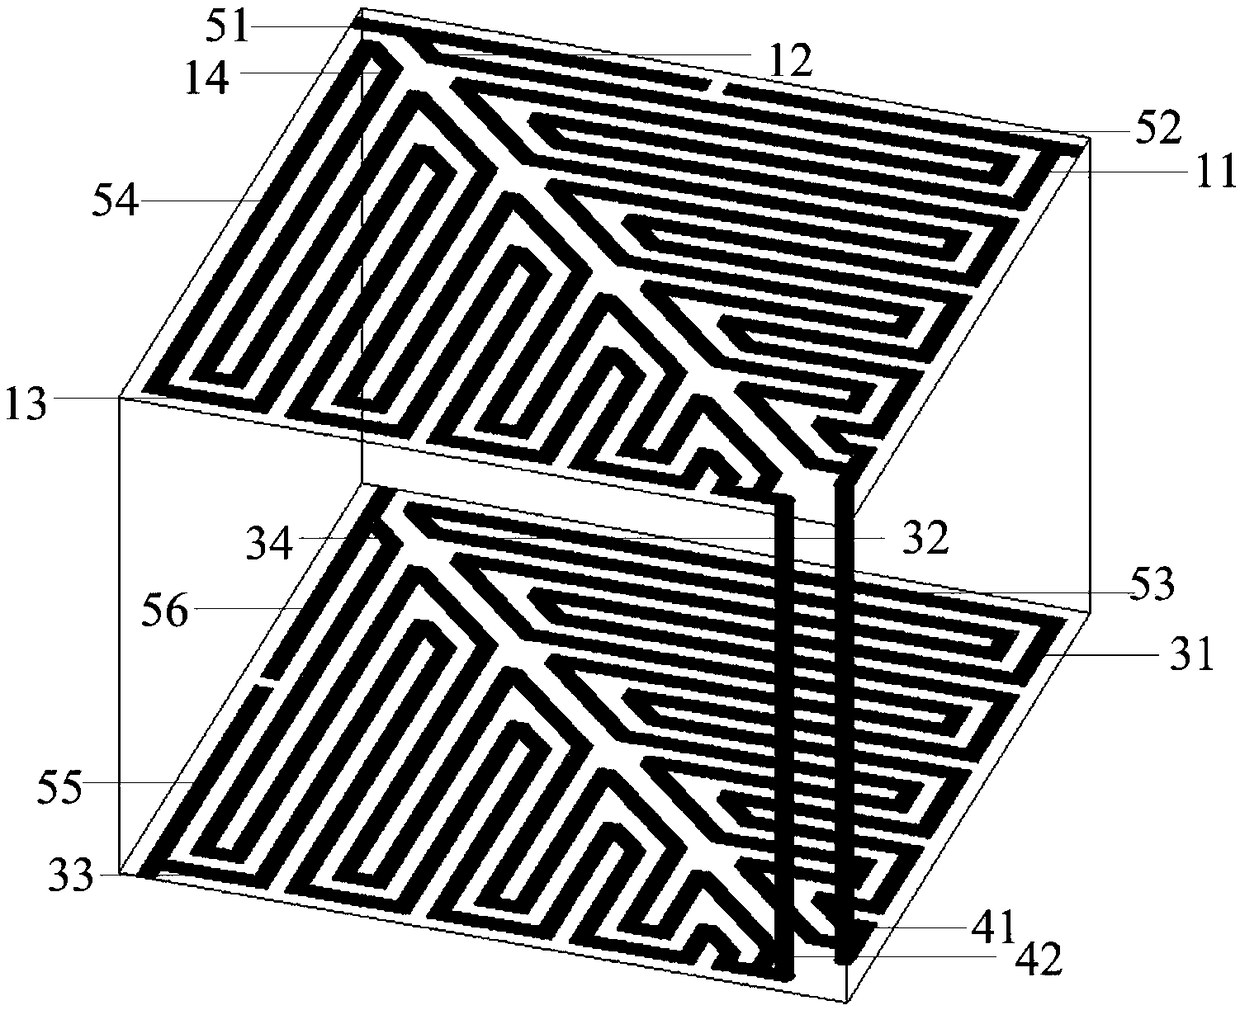 Frequency selection surface with miniaturized low frequency number ratio